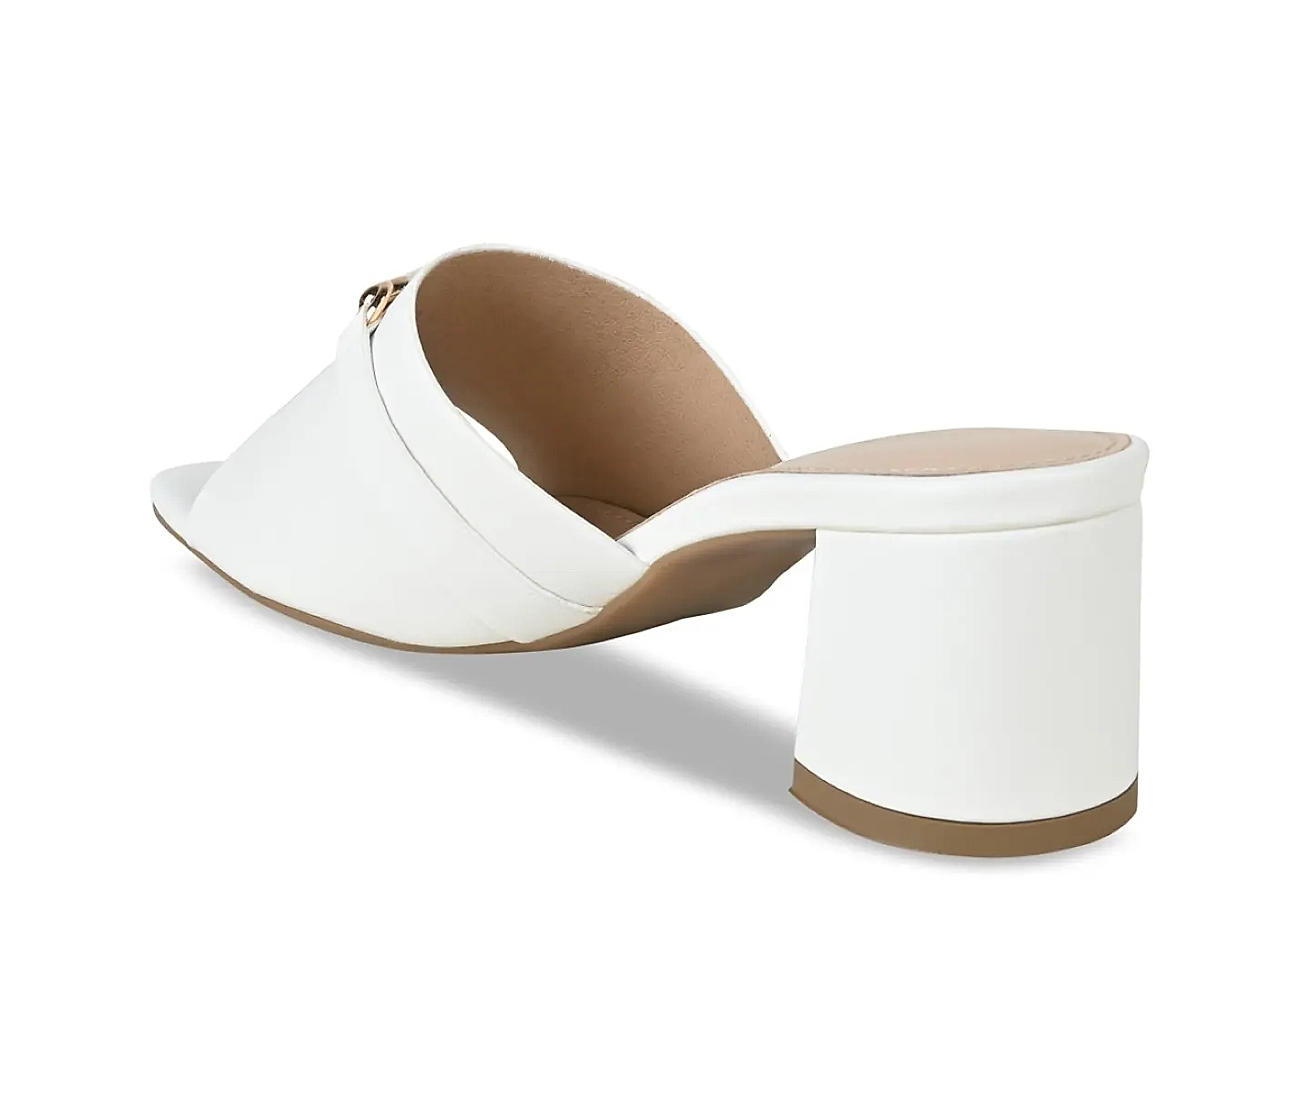 White High Heel Sandals - Woven Sandals - Ankle Strap High Heels - Lulus